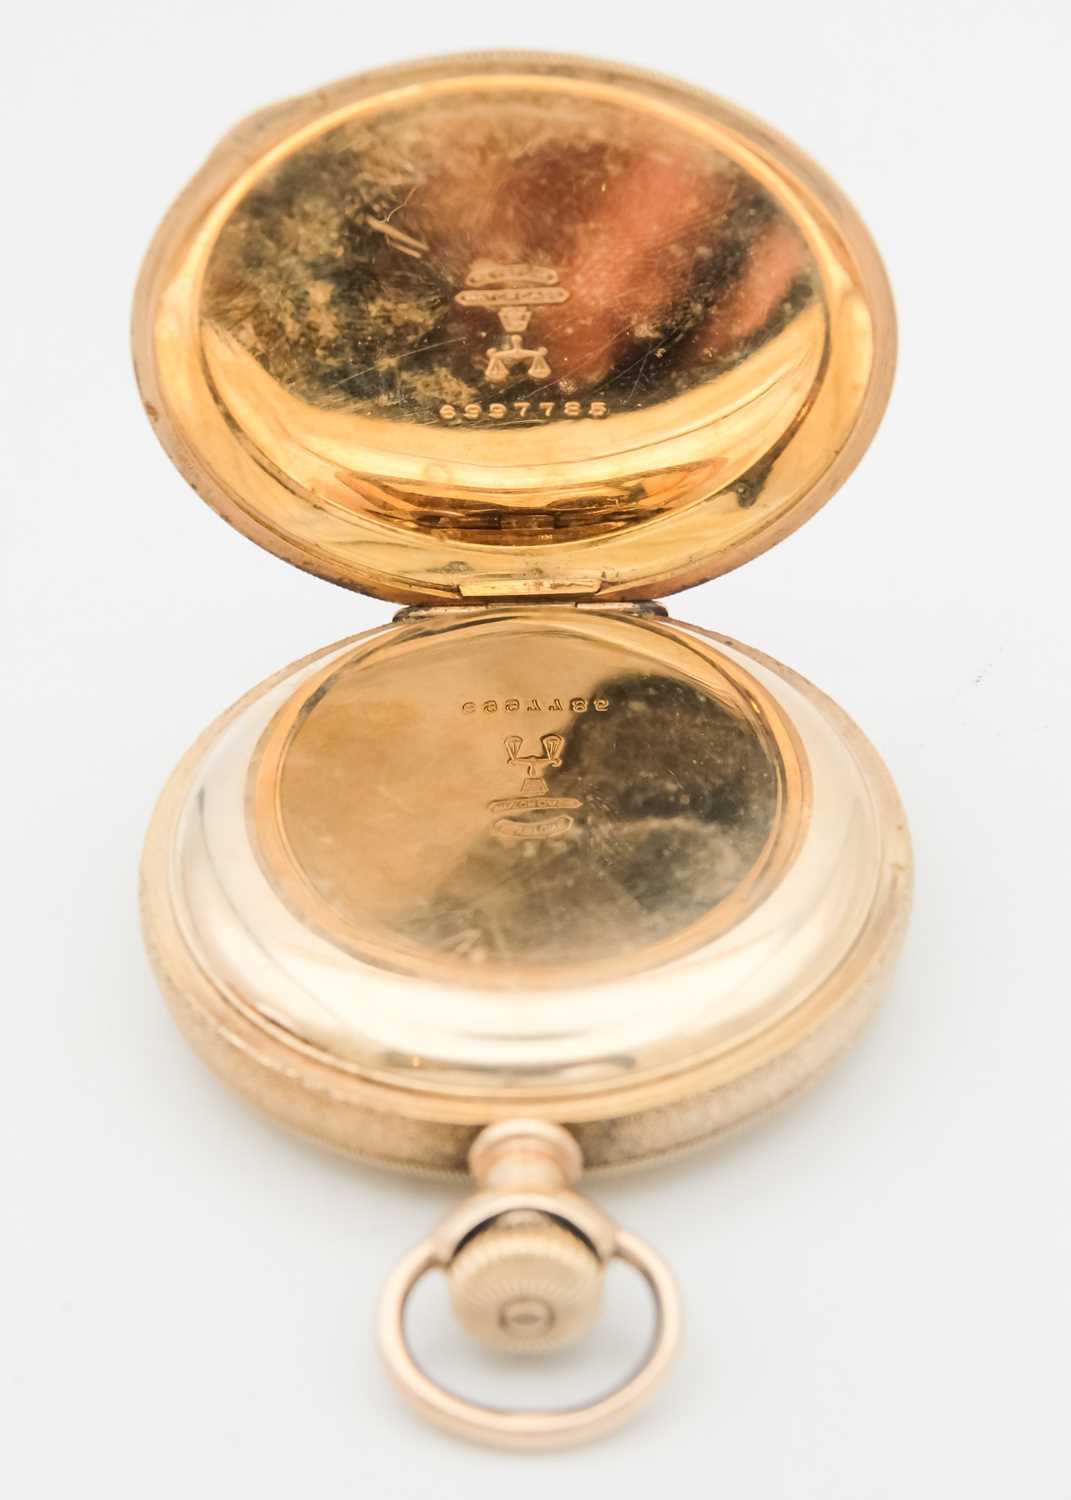 ELGIN - A rose gold plated full hunter crown wind pocket watch. - Image 3 of 6